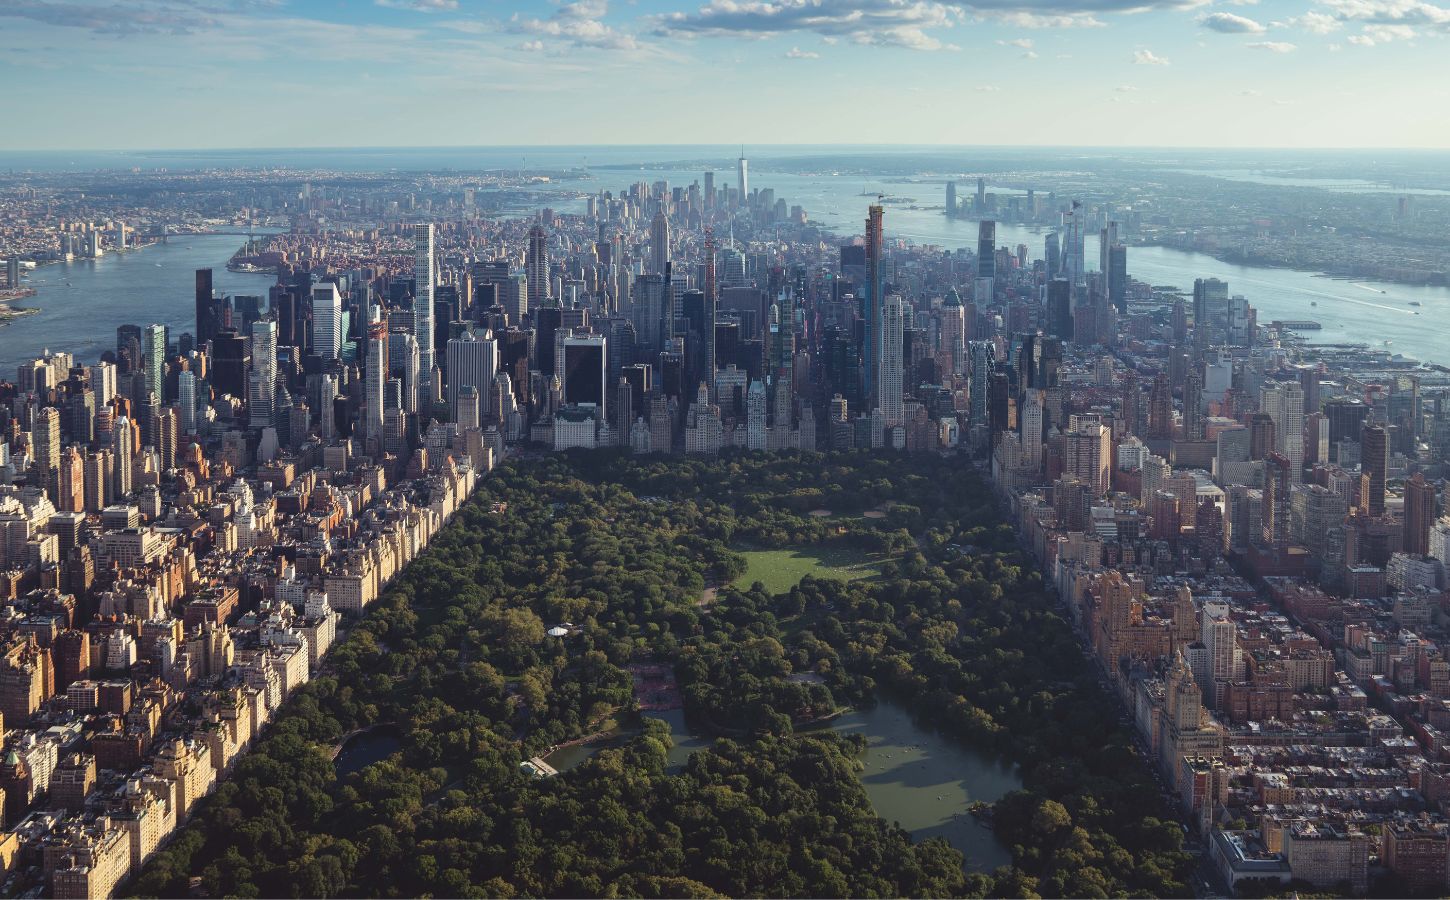 An aerial view of New York City, with Central Park in the middle